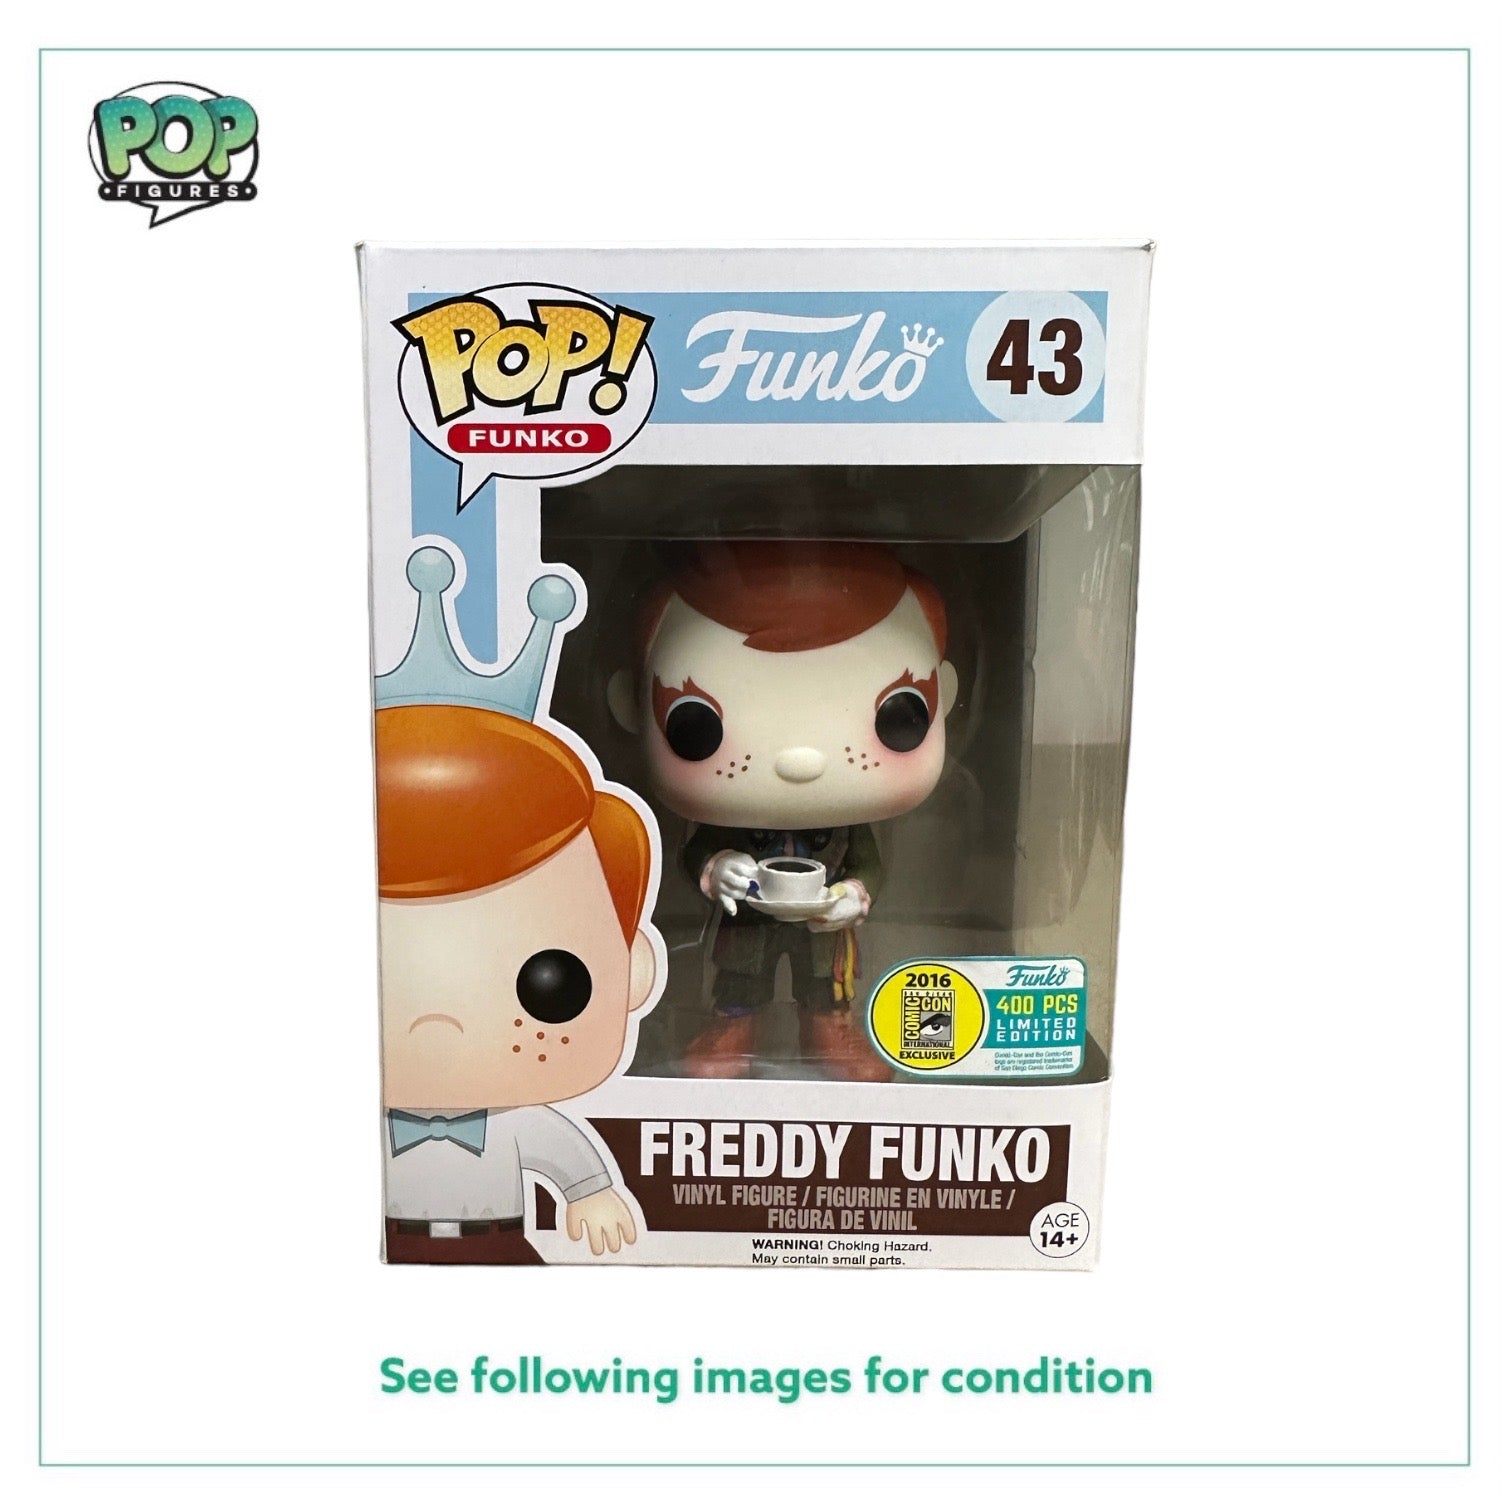 Freddy Funko as Mad Hatter #43 Funko Pop! - SDCC 2016 Exclusive LE400 Pcs - Condition 8/10